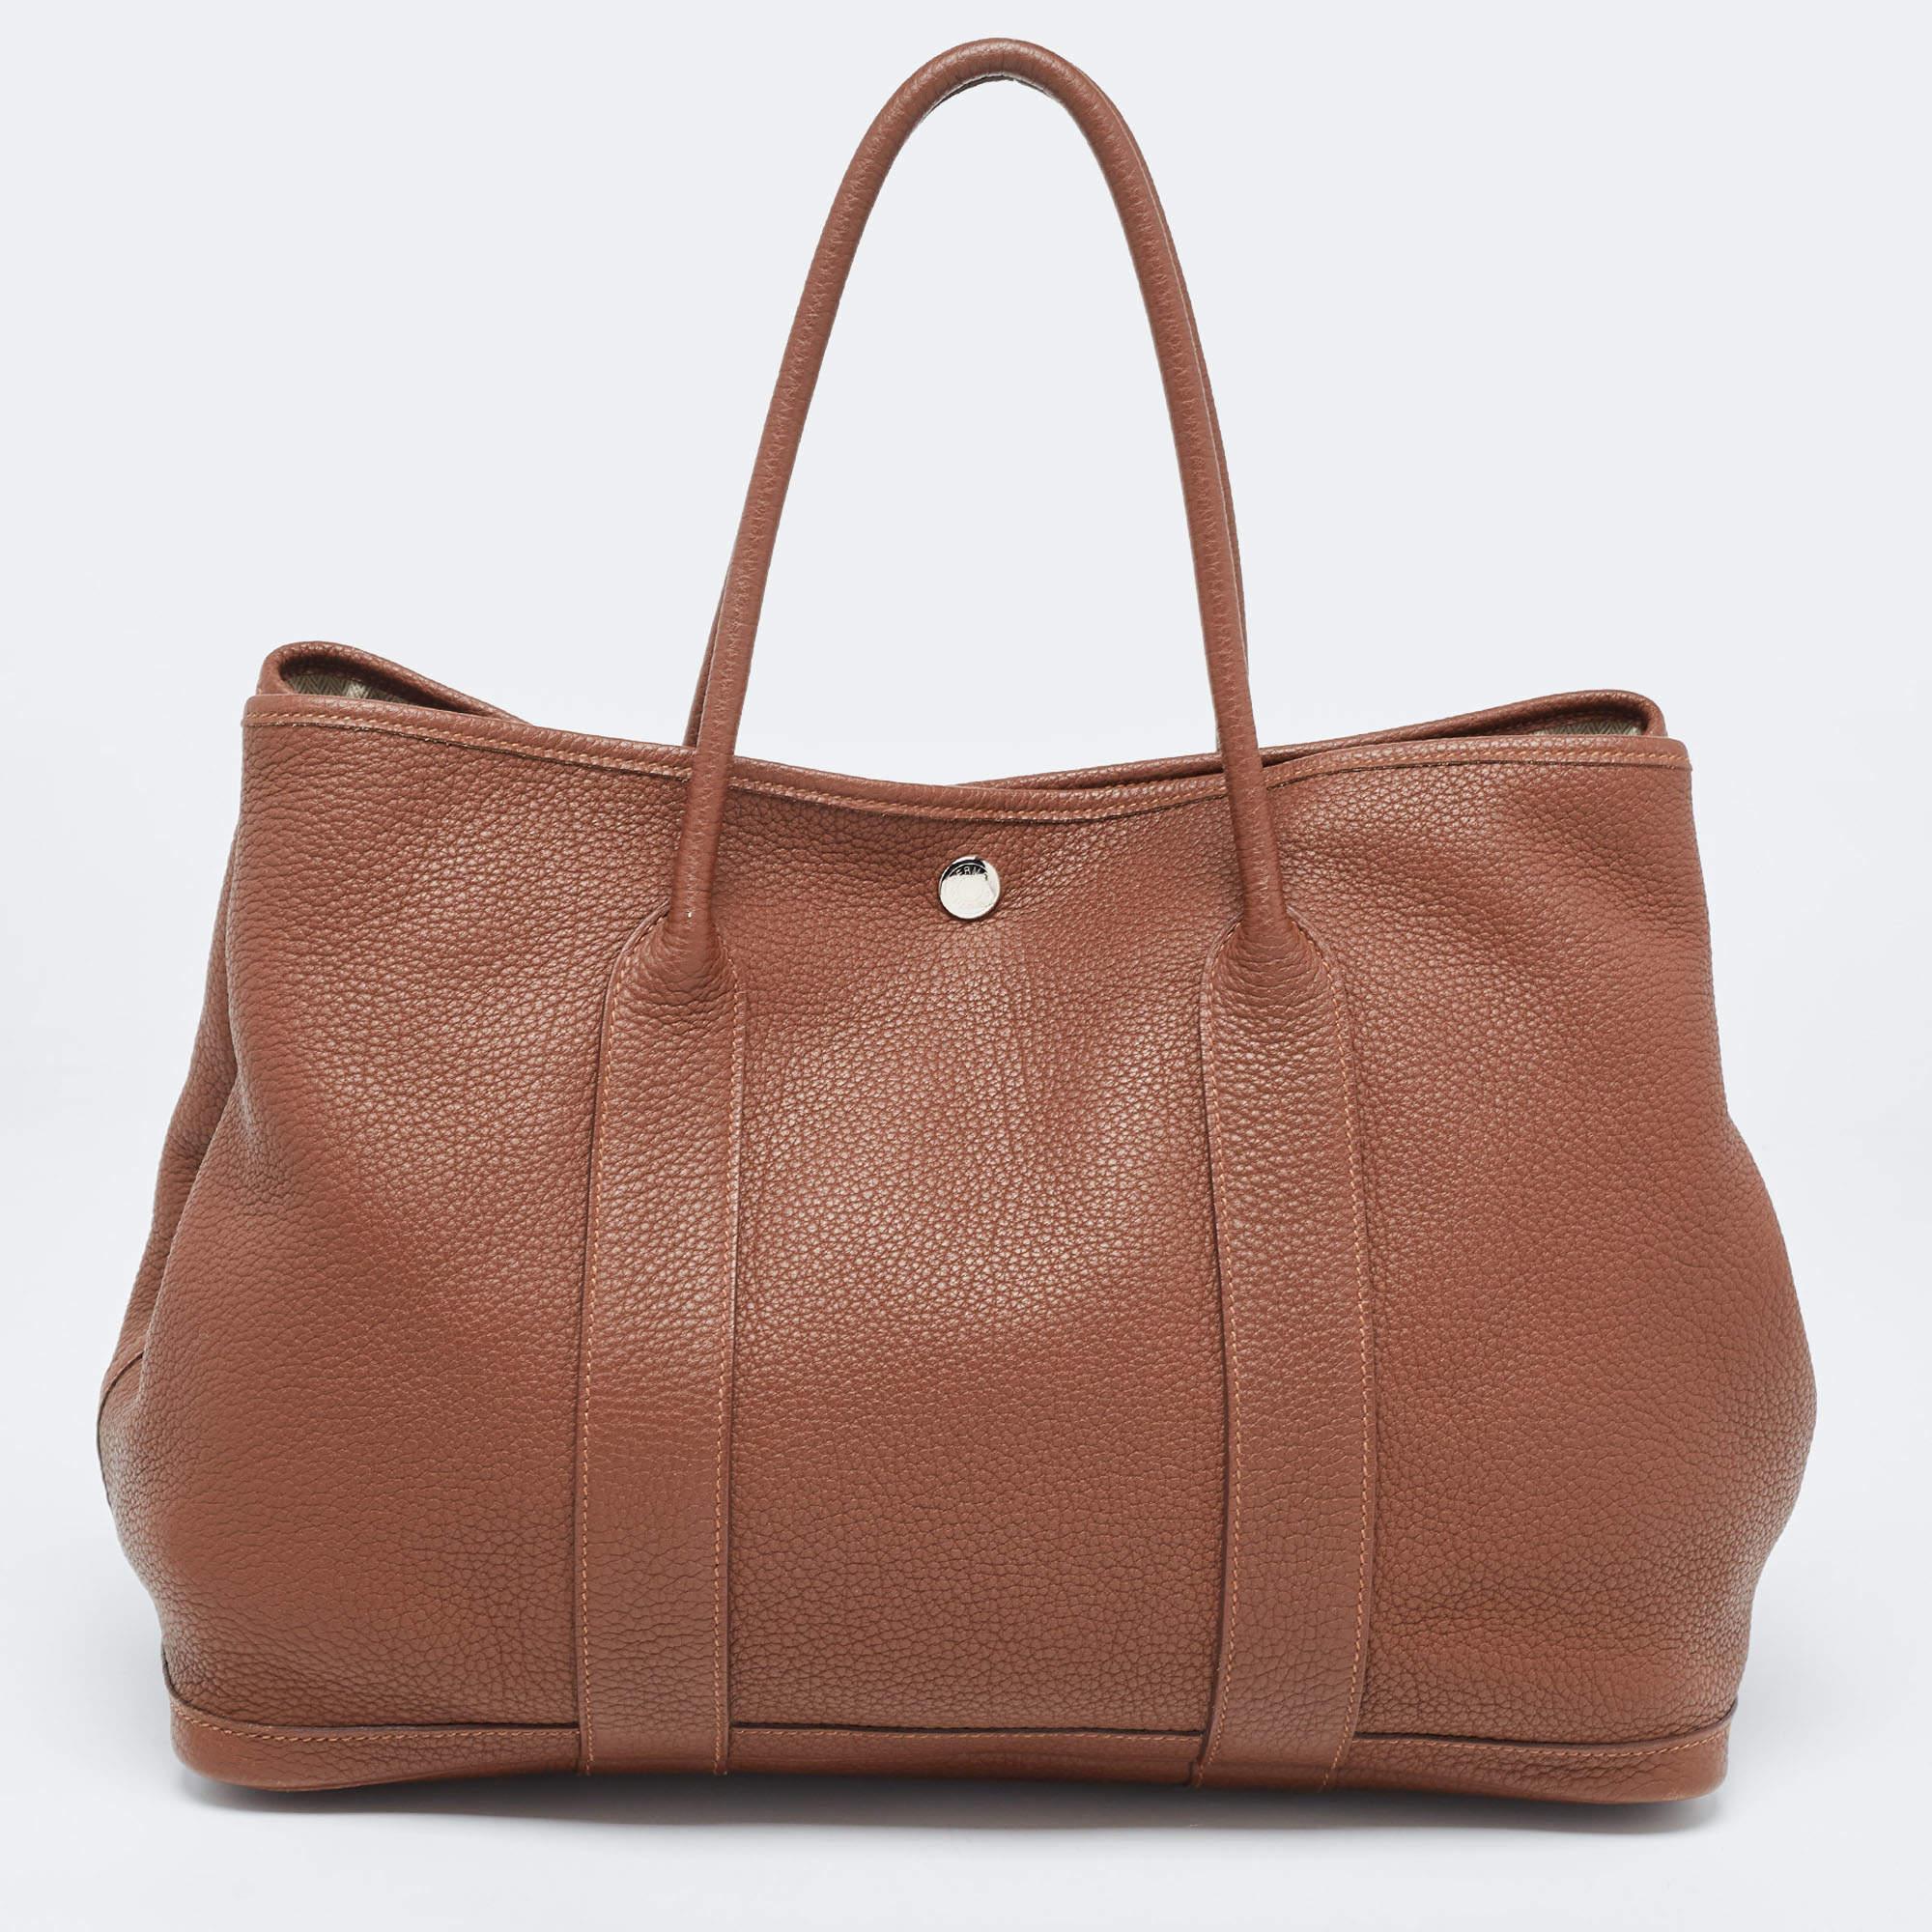 This Hermes Garden Party 36 promises to take you through the day with ease, whether you're at work or out and about in the city. From its design to its structure, the leather bag promises charm and durability. It has top handles, metal buttons, and